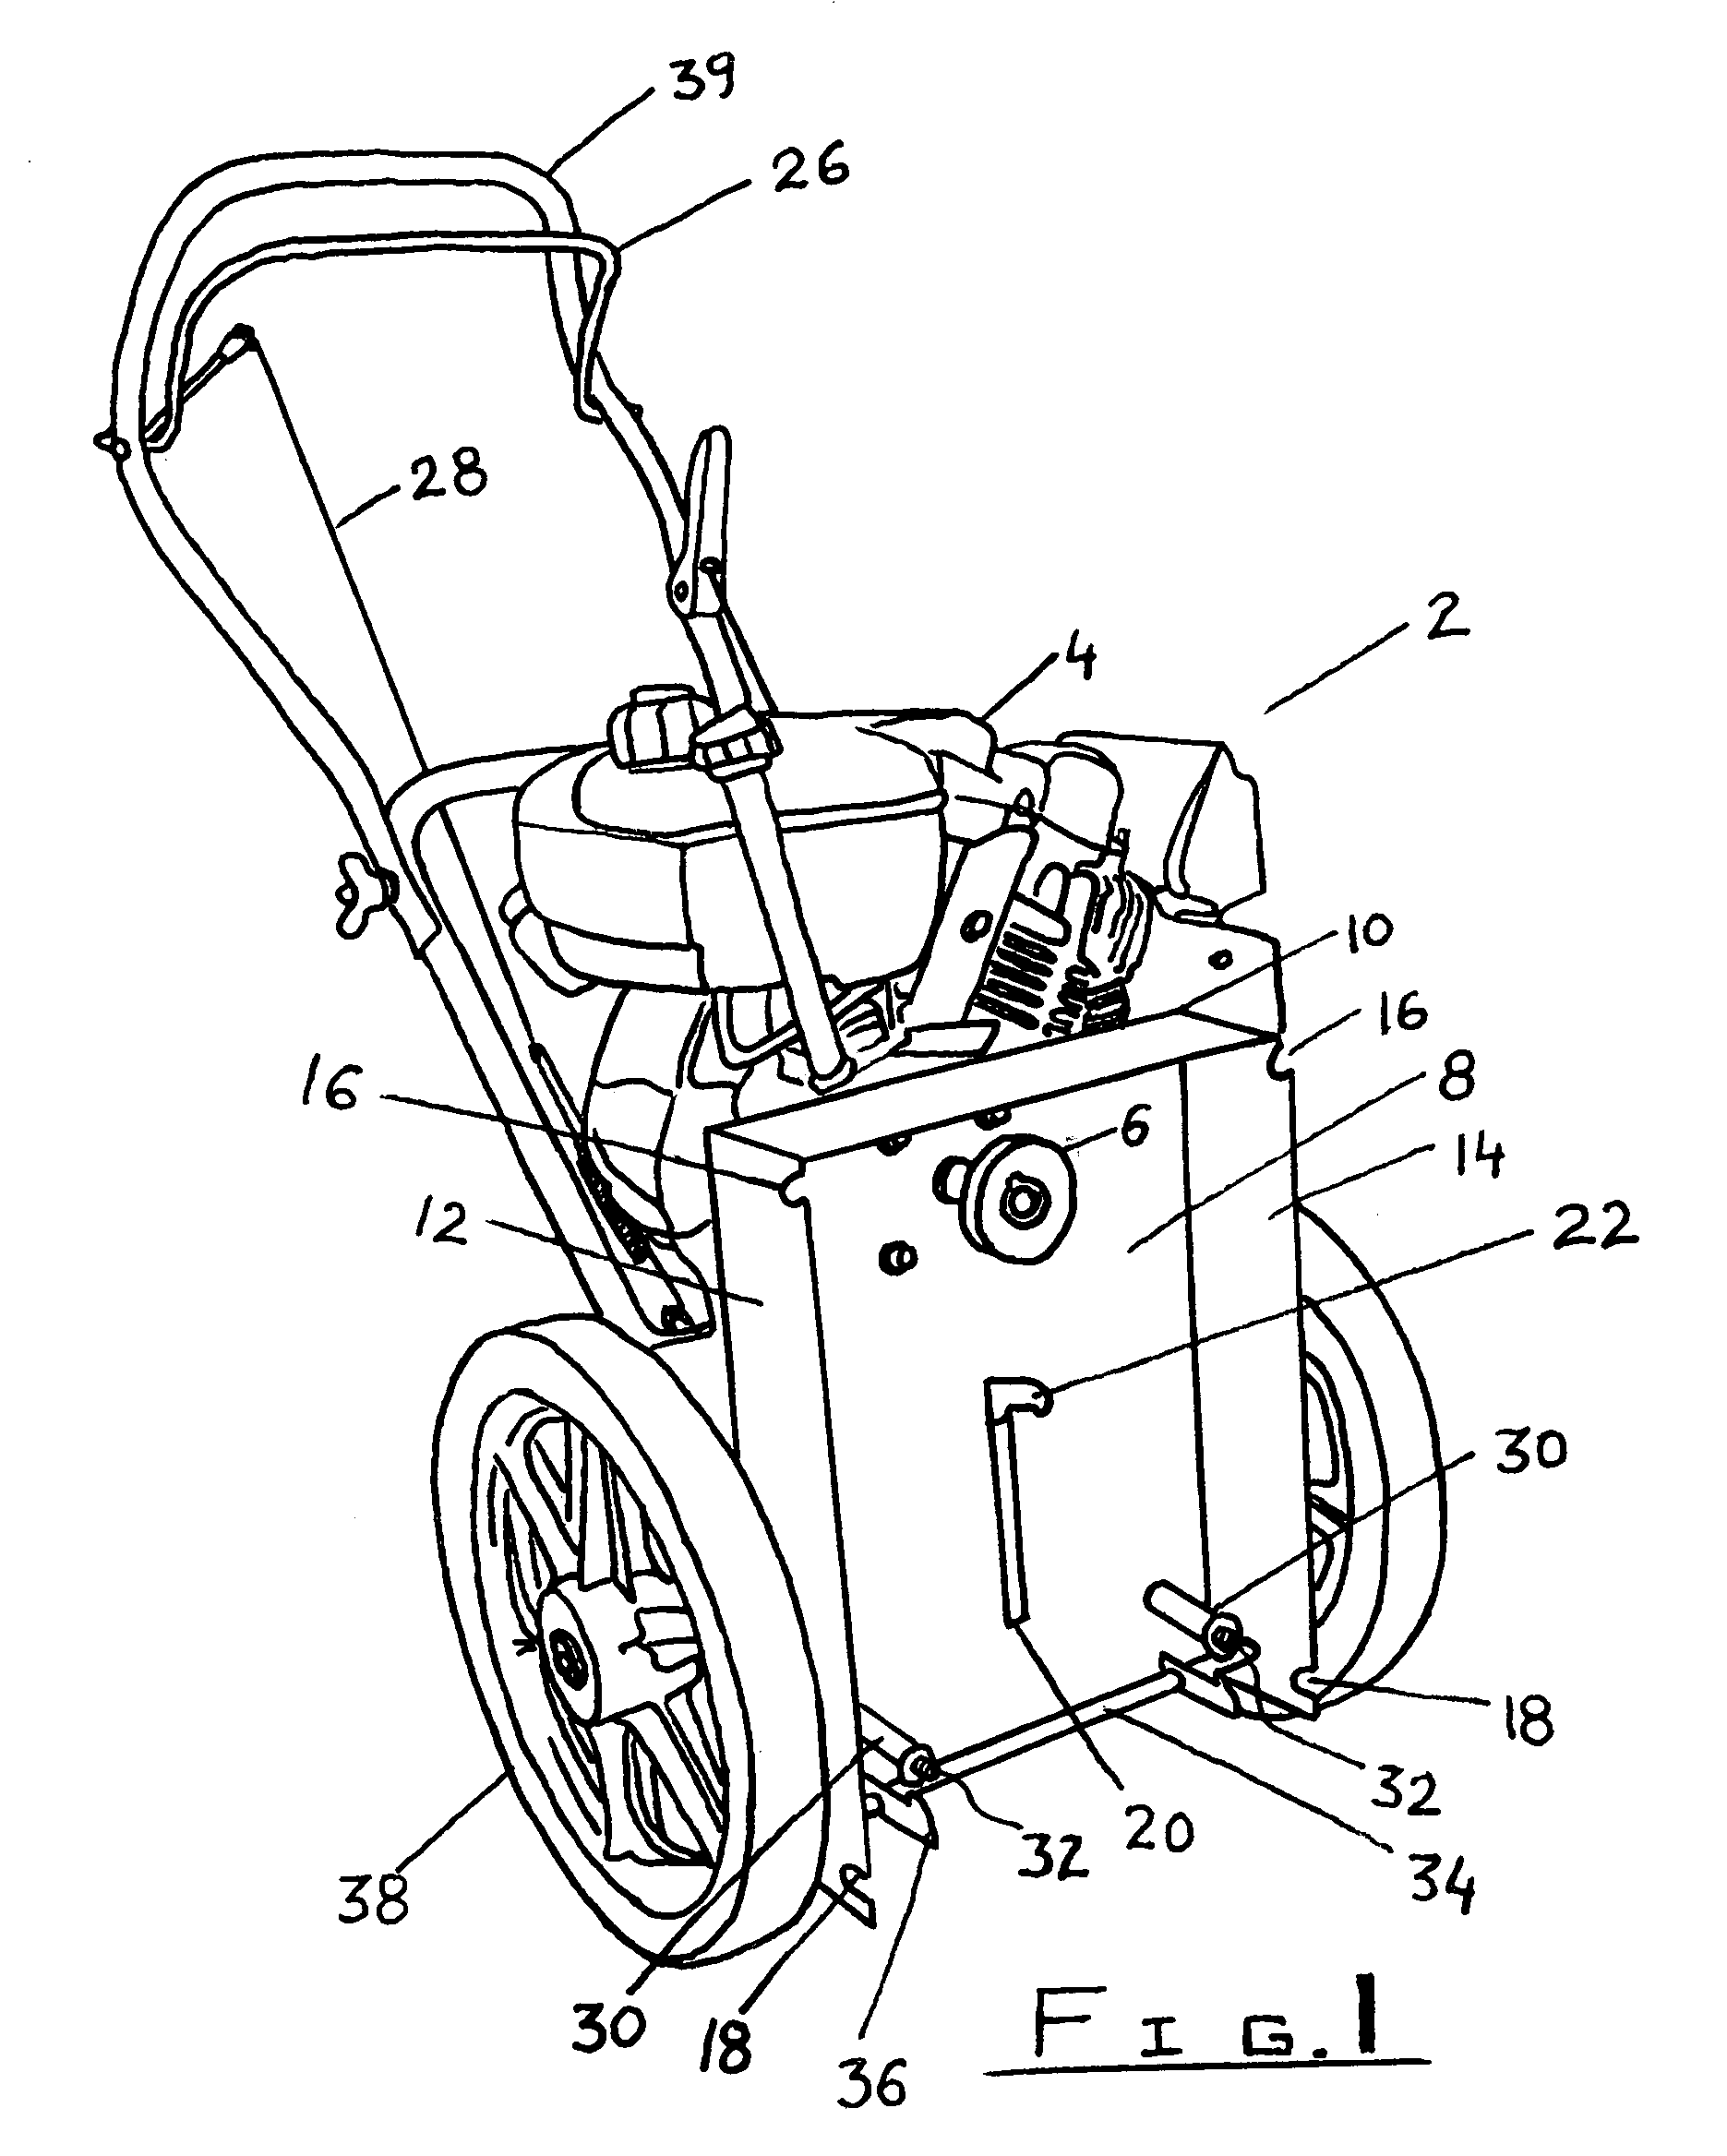 Landscape maintenance device and method of use thereof